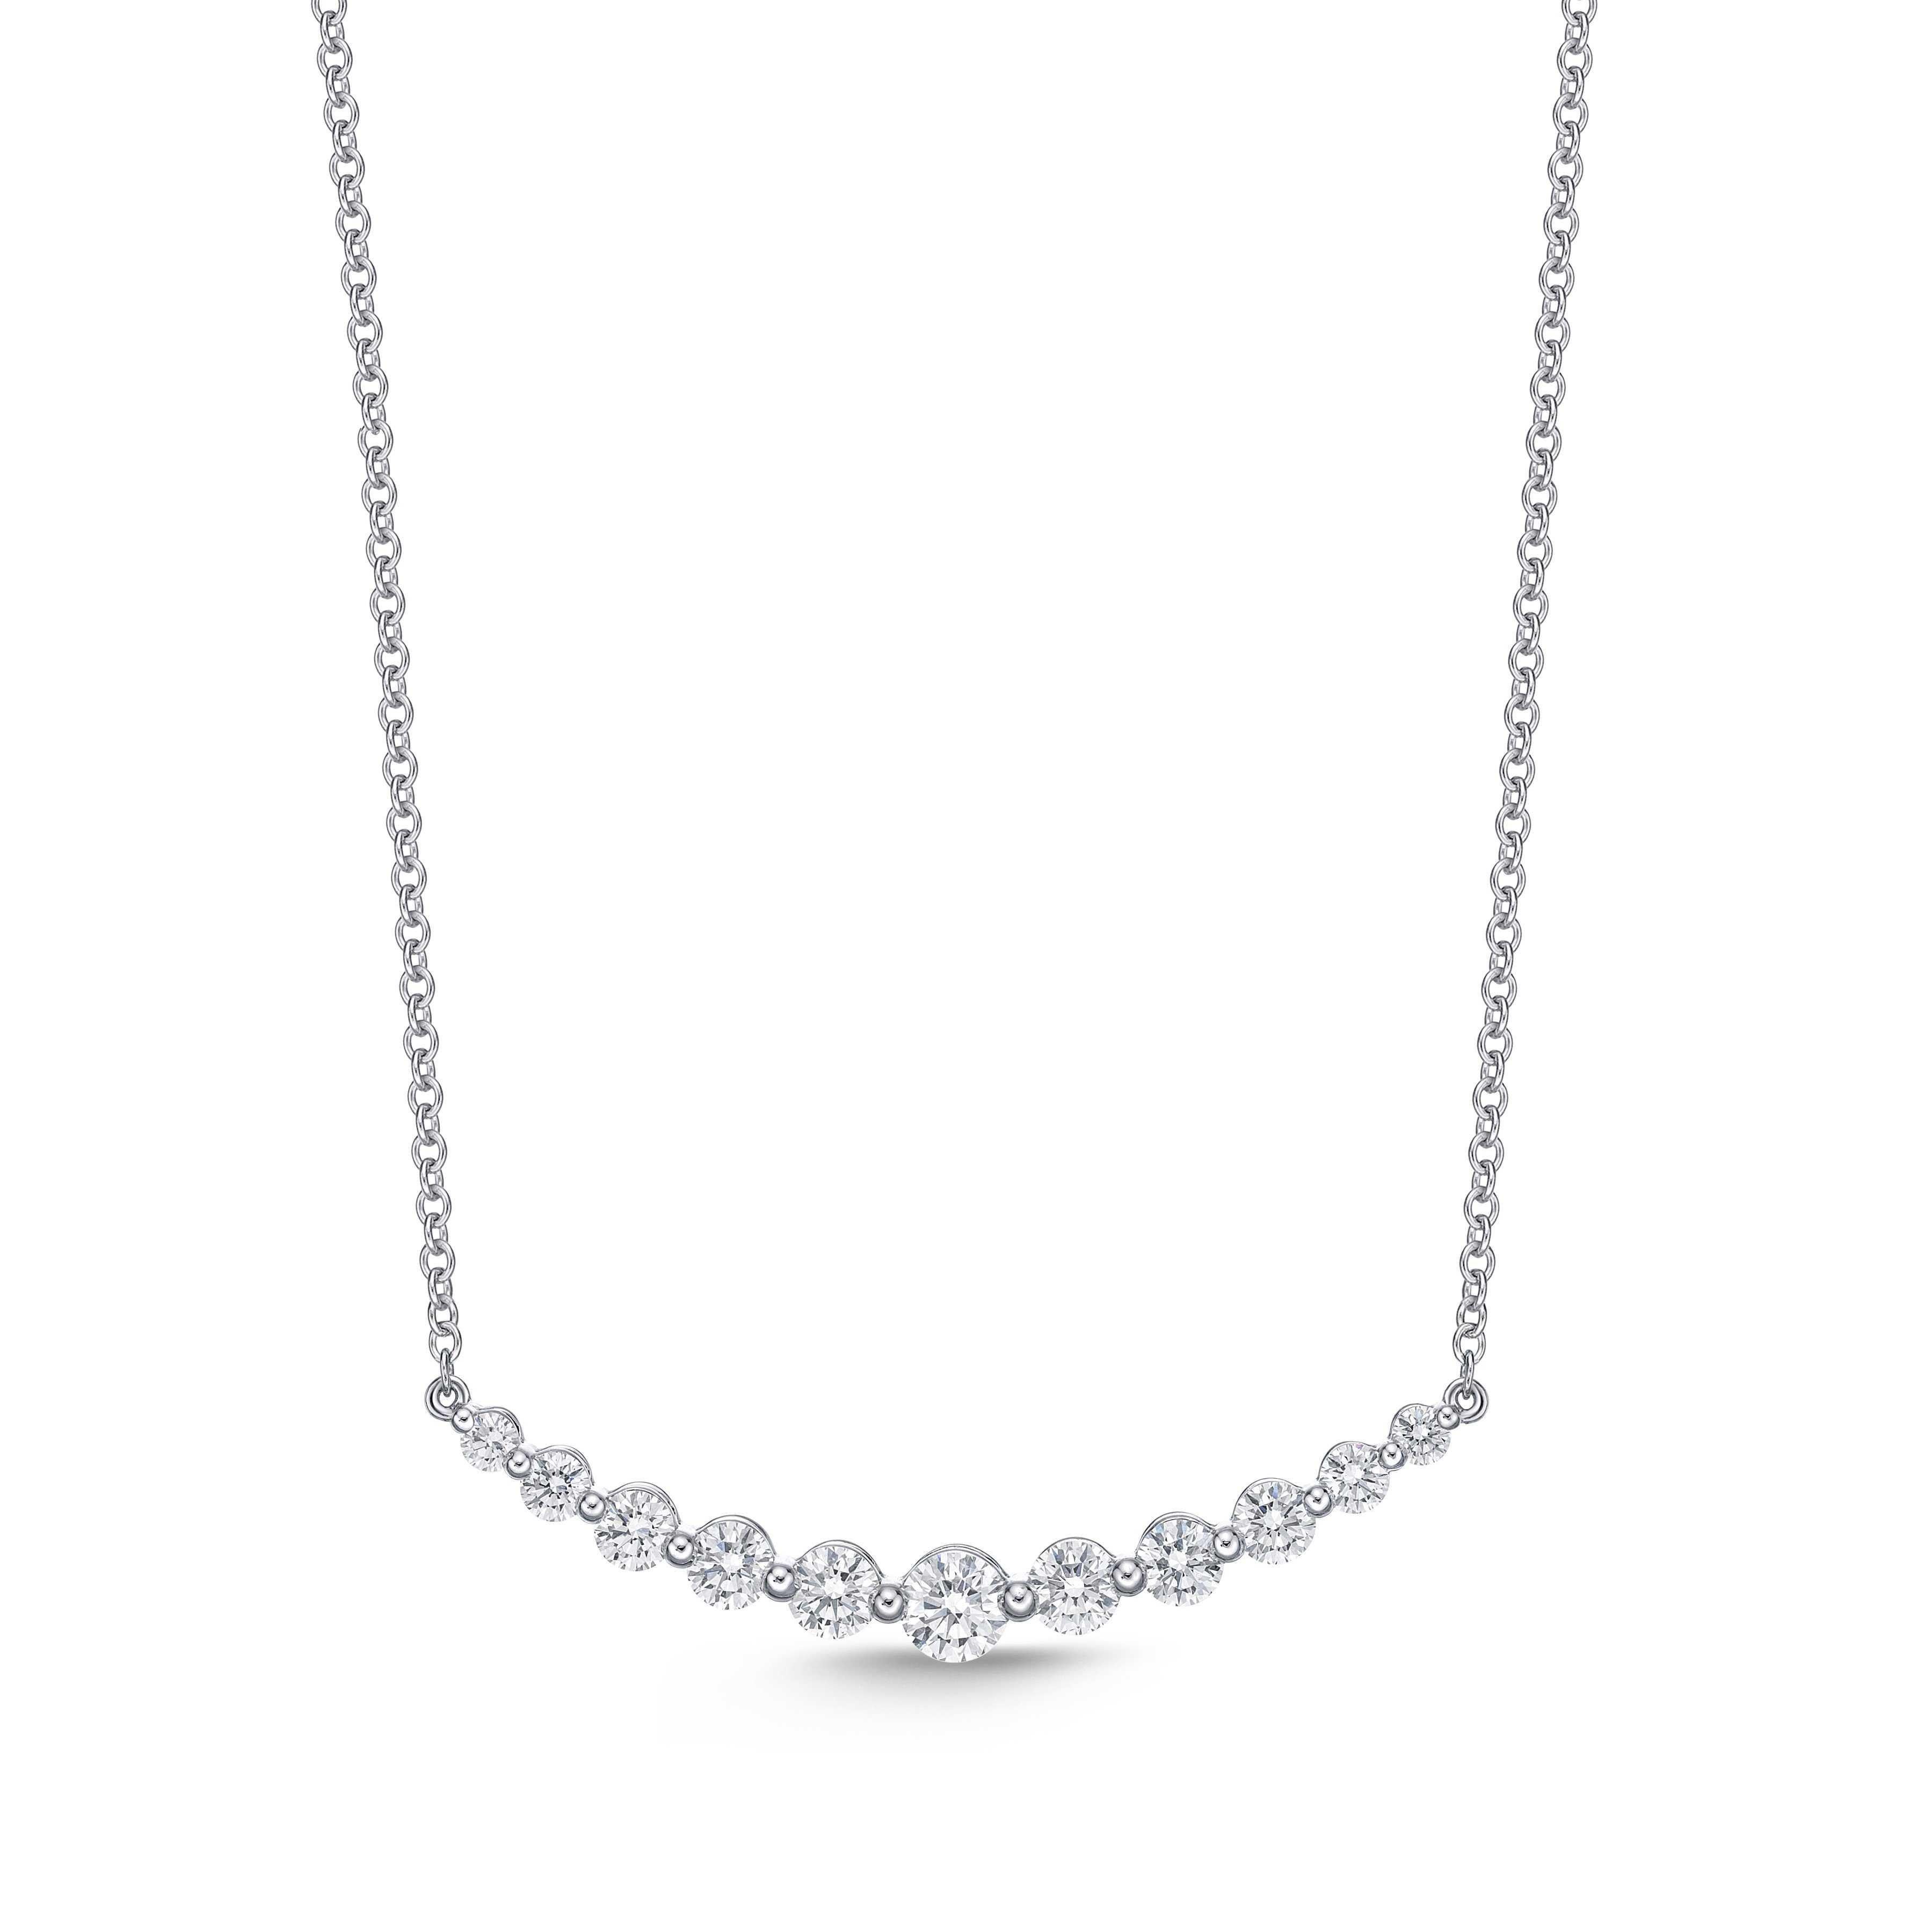 This Memoire Diamond Classic Smile Necklace is crafted with 18K white gold and is 18 inches long, weighing 3.9 grams. It features 11 brilliant-cut diamonds, with a total carat weight of 1.08 cts, rated F-G in color and VS1-VS2 in clarity.